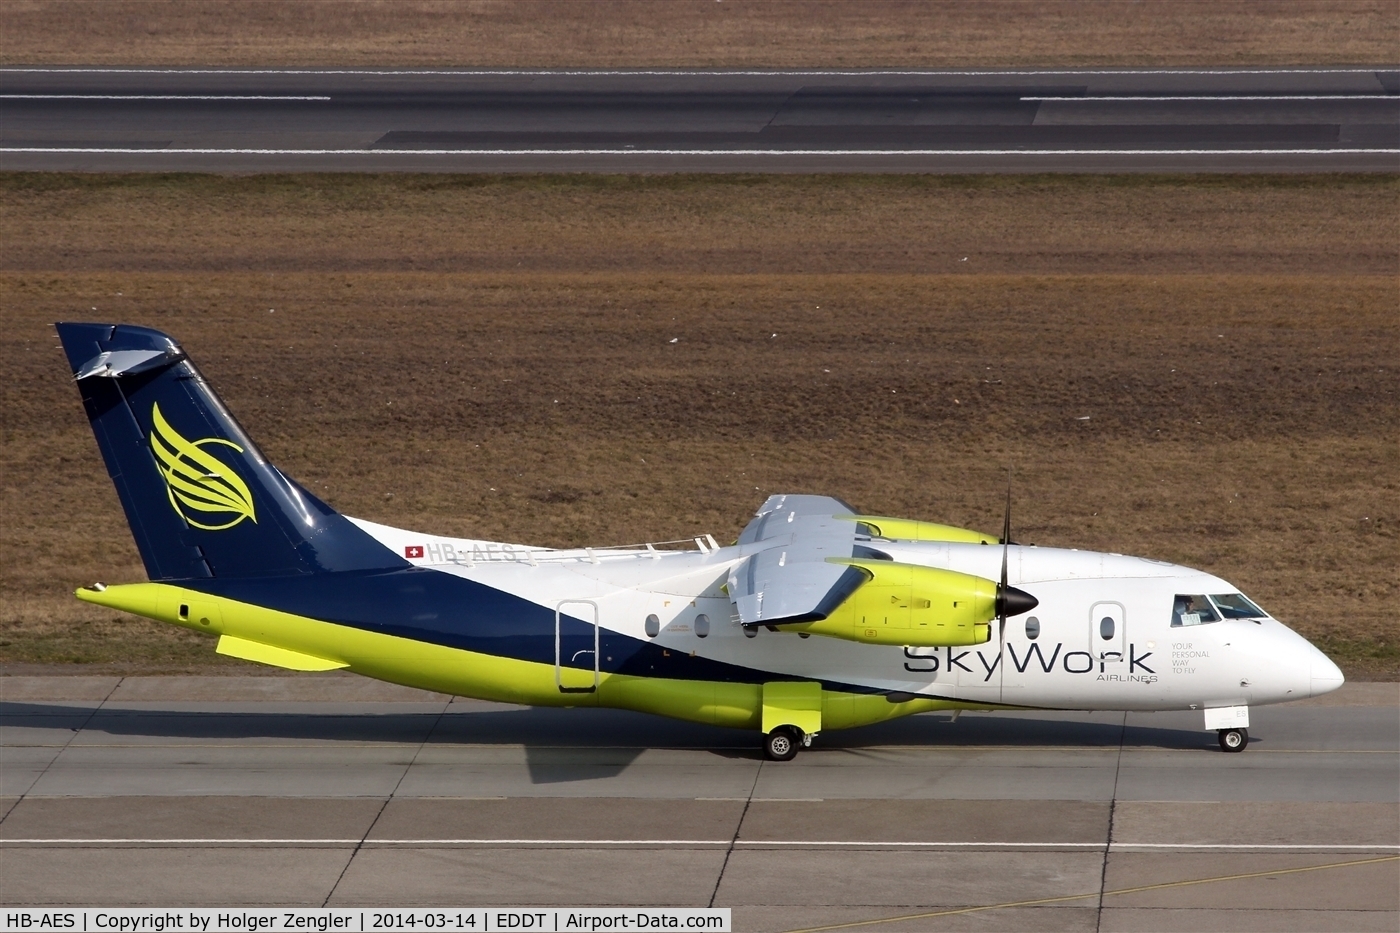 HB-AES, 1995 Dornier 328-110 C/N 3021, On taxi to departure..